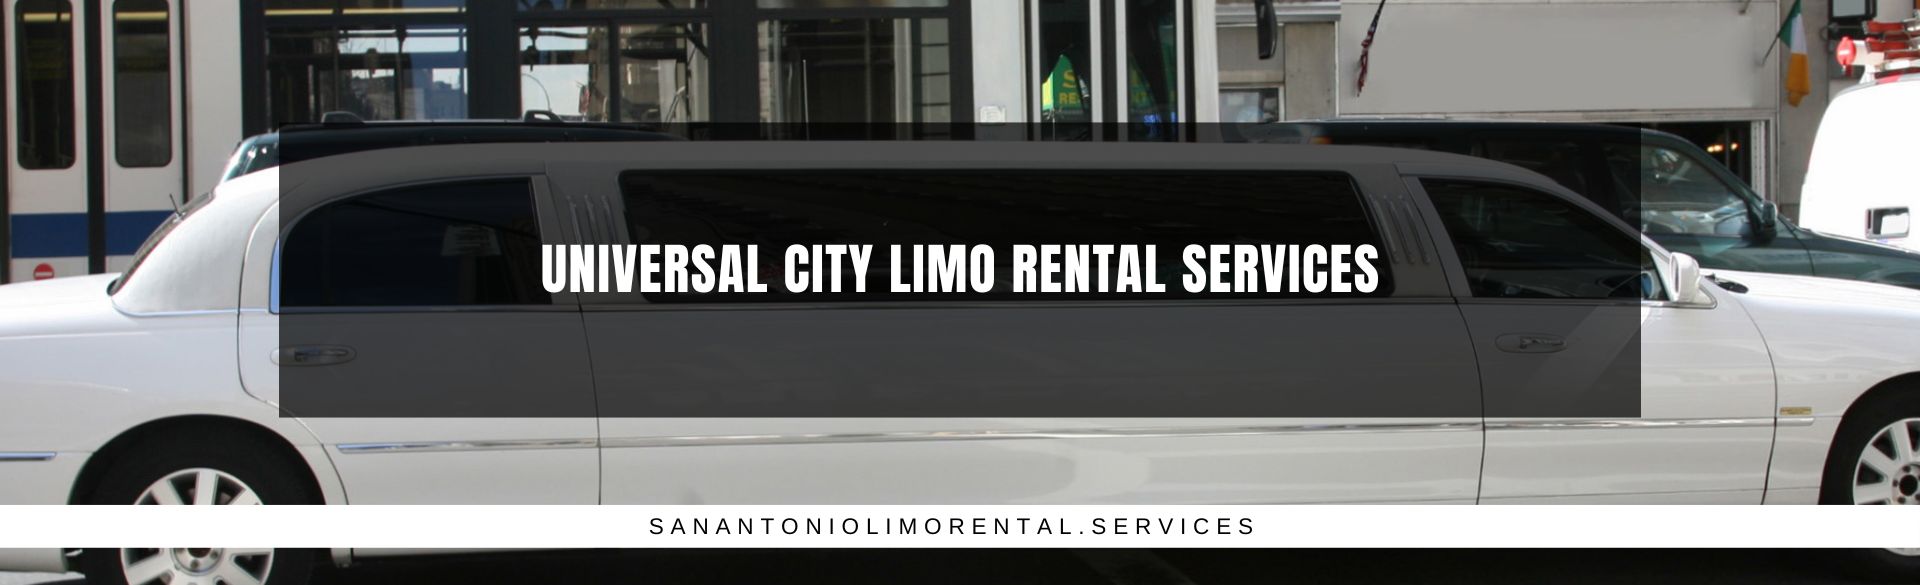 Universal City Limo Rental Services